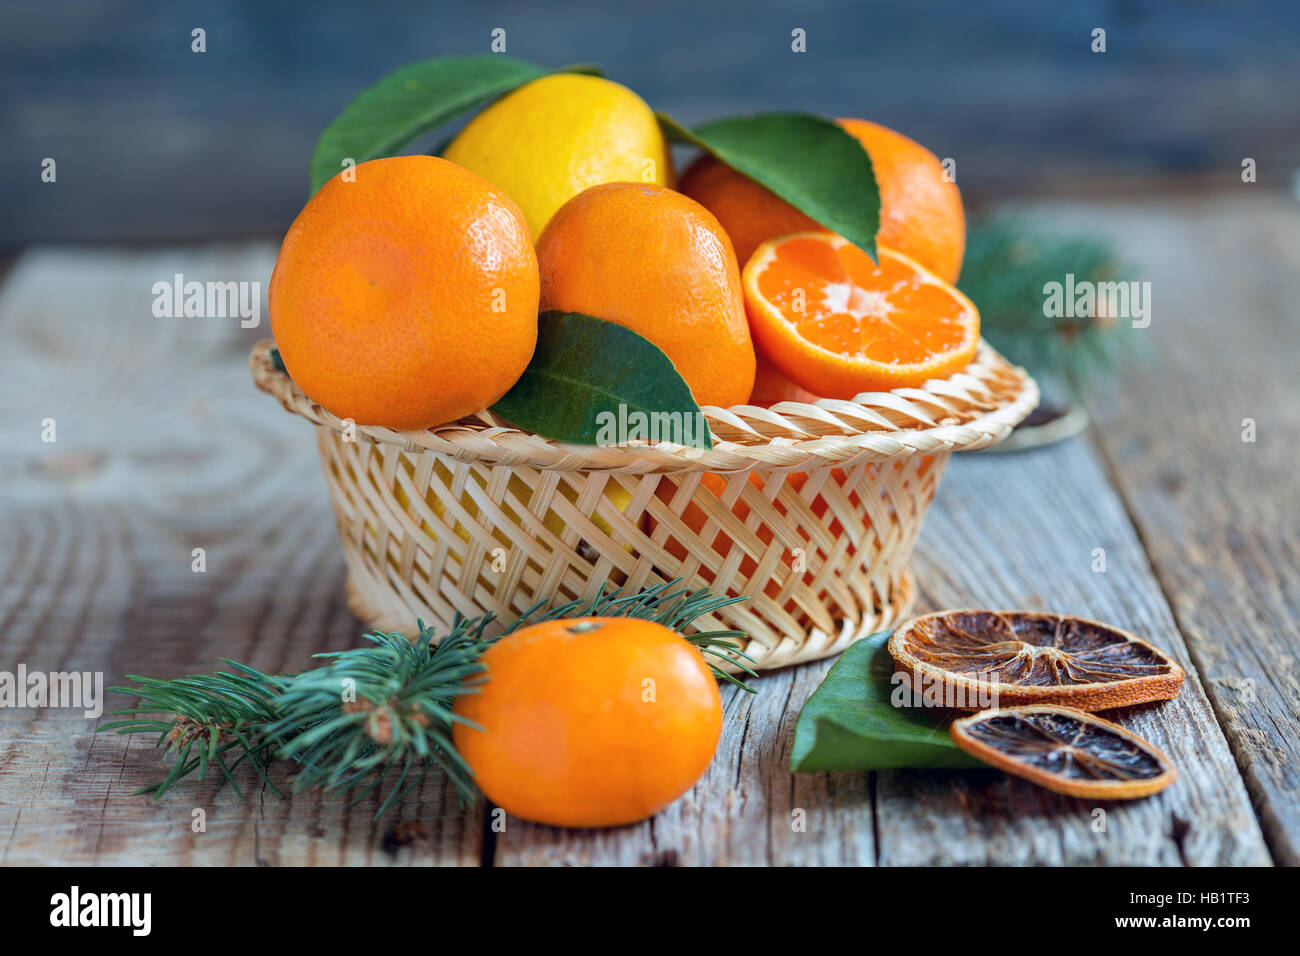 Basket with citrus and spruce branches. Stock Photo